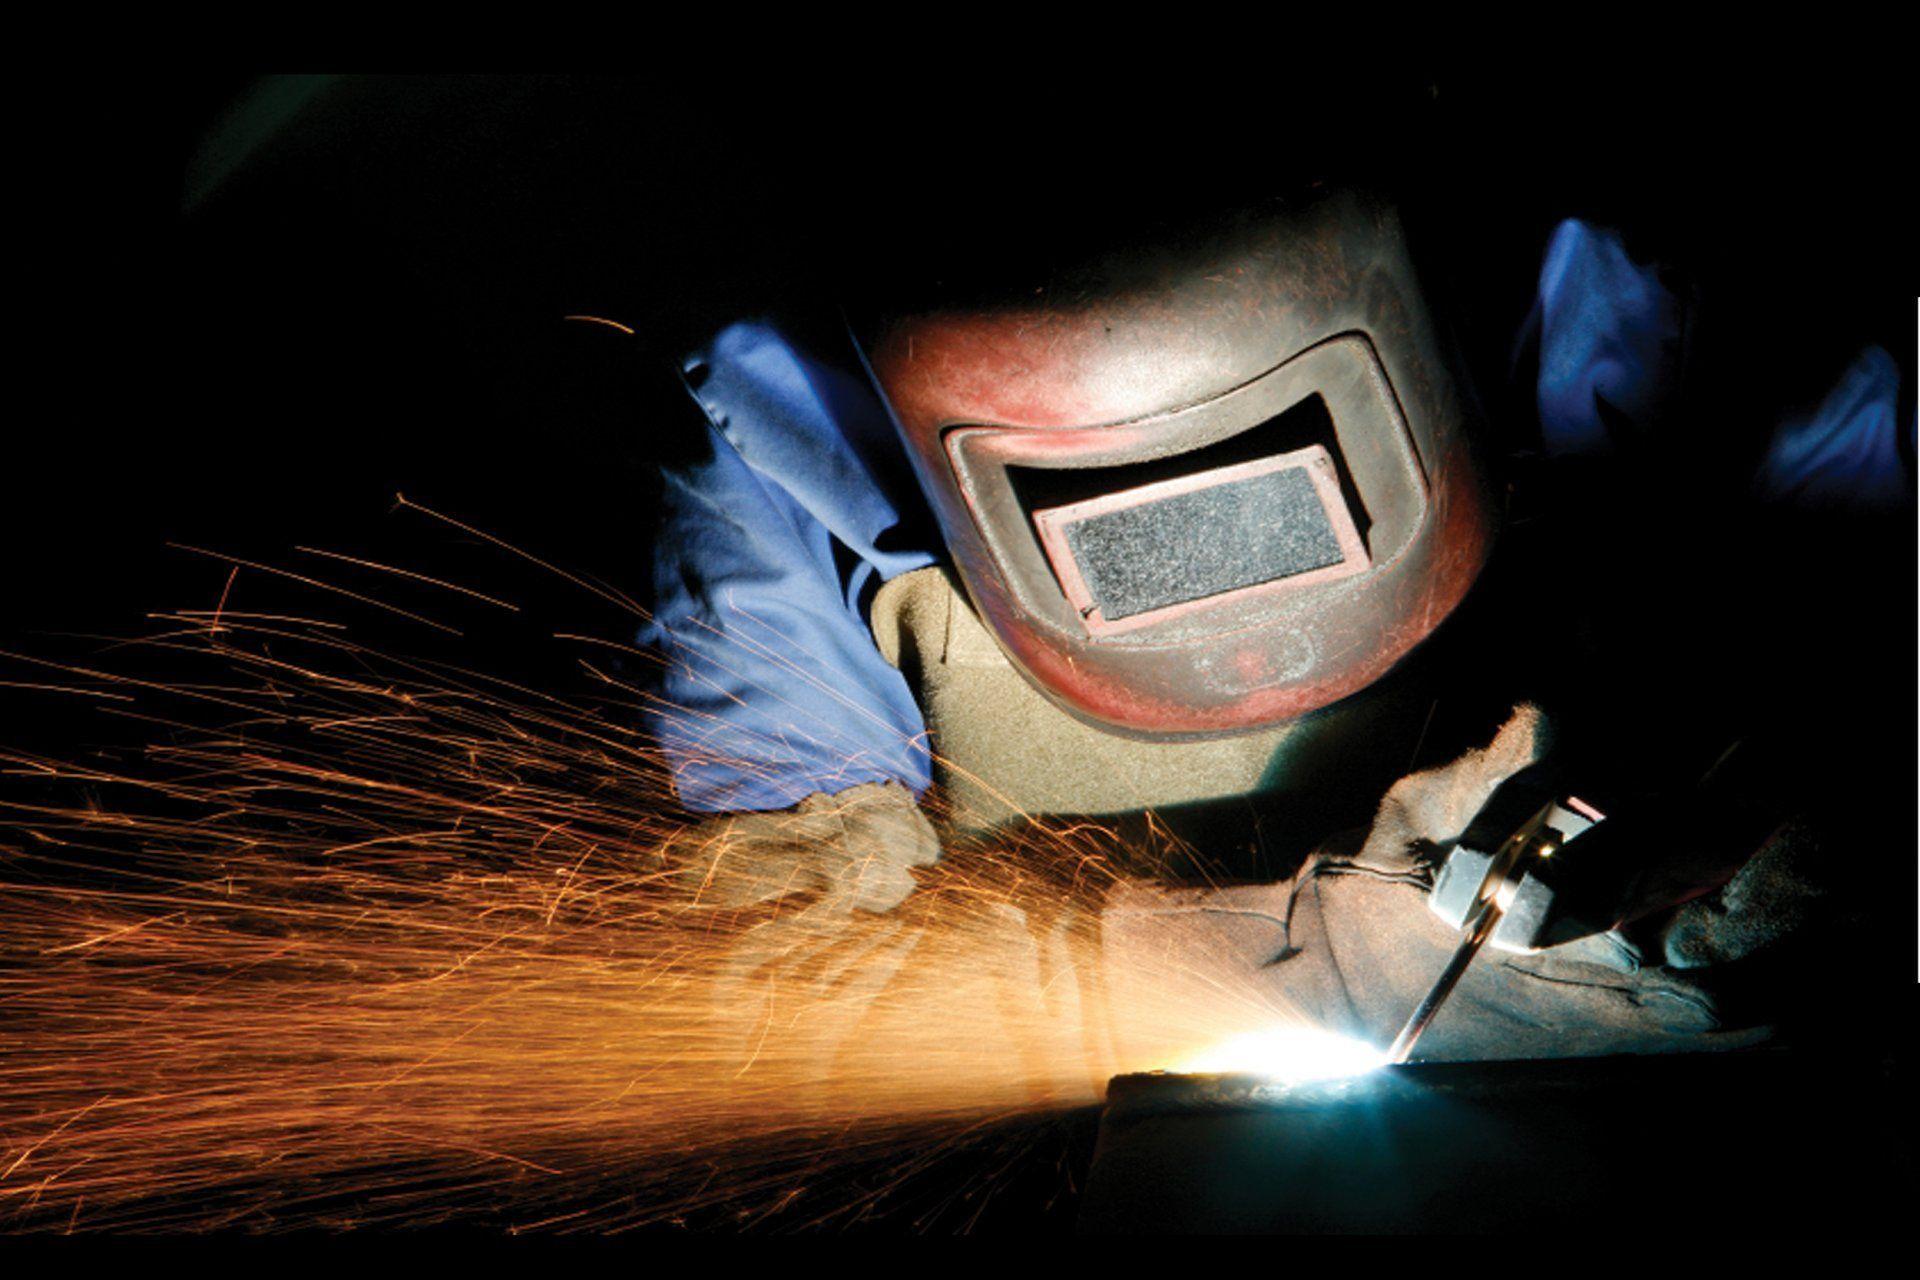 steel fabrication personal protective equipment welding electrical